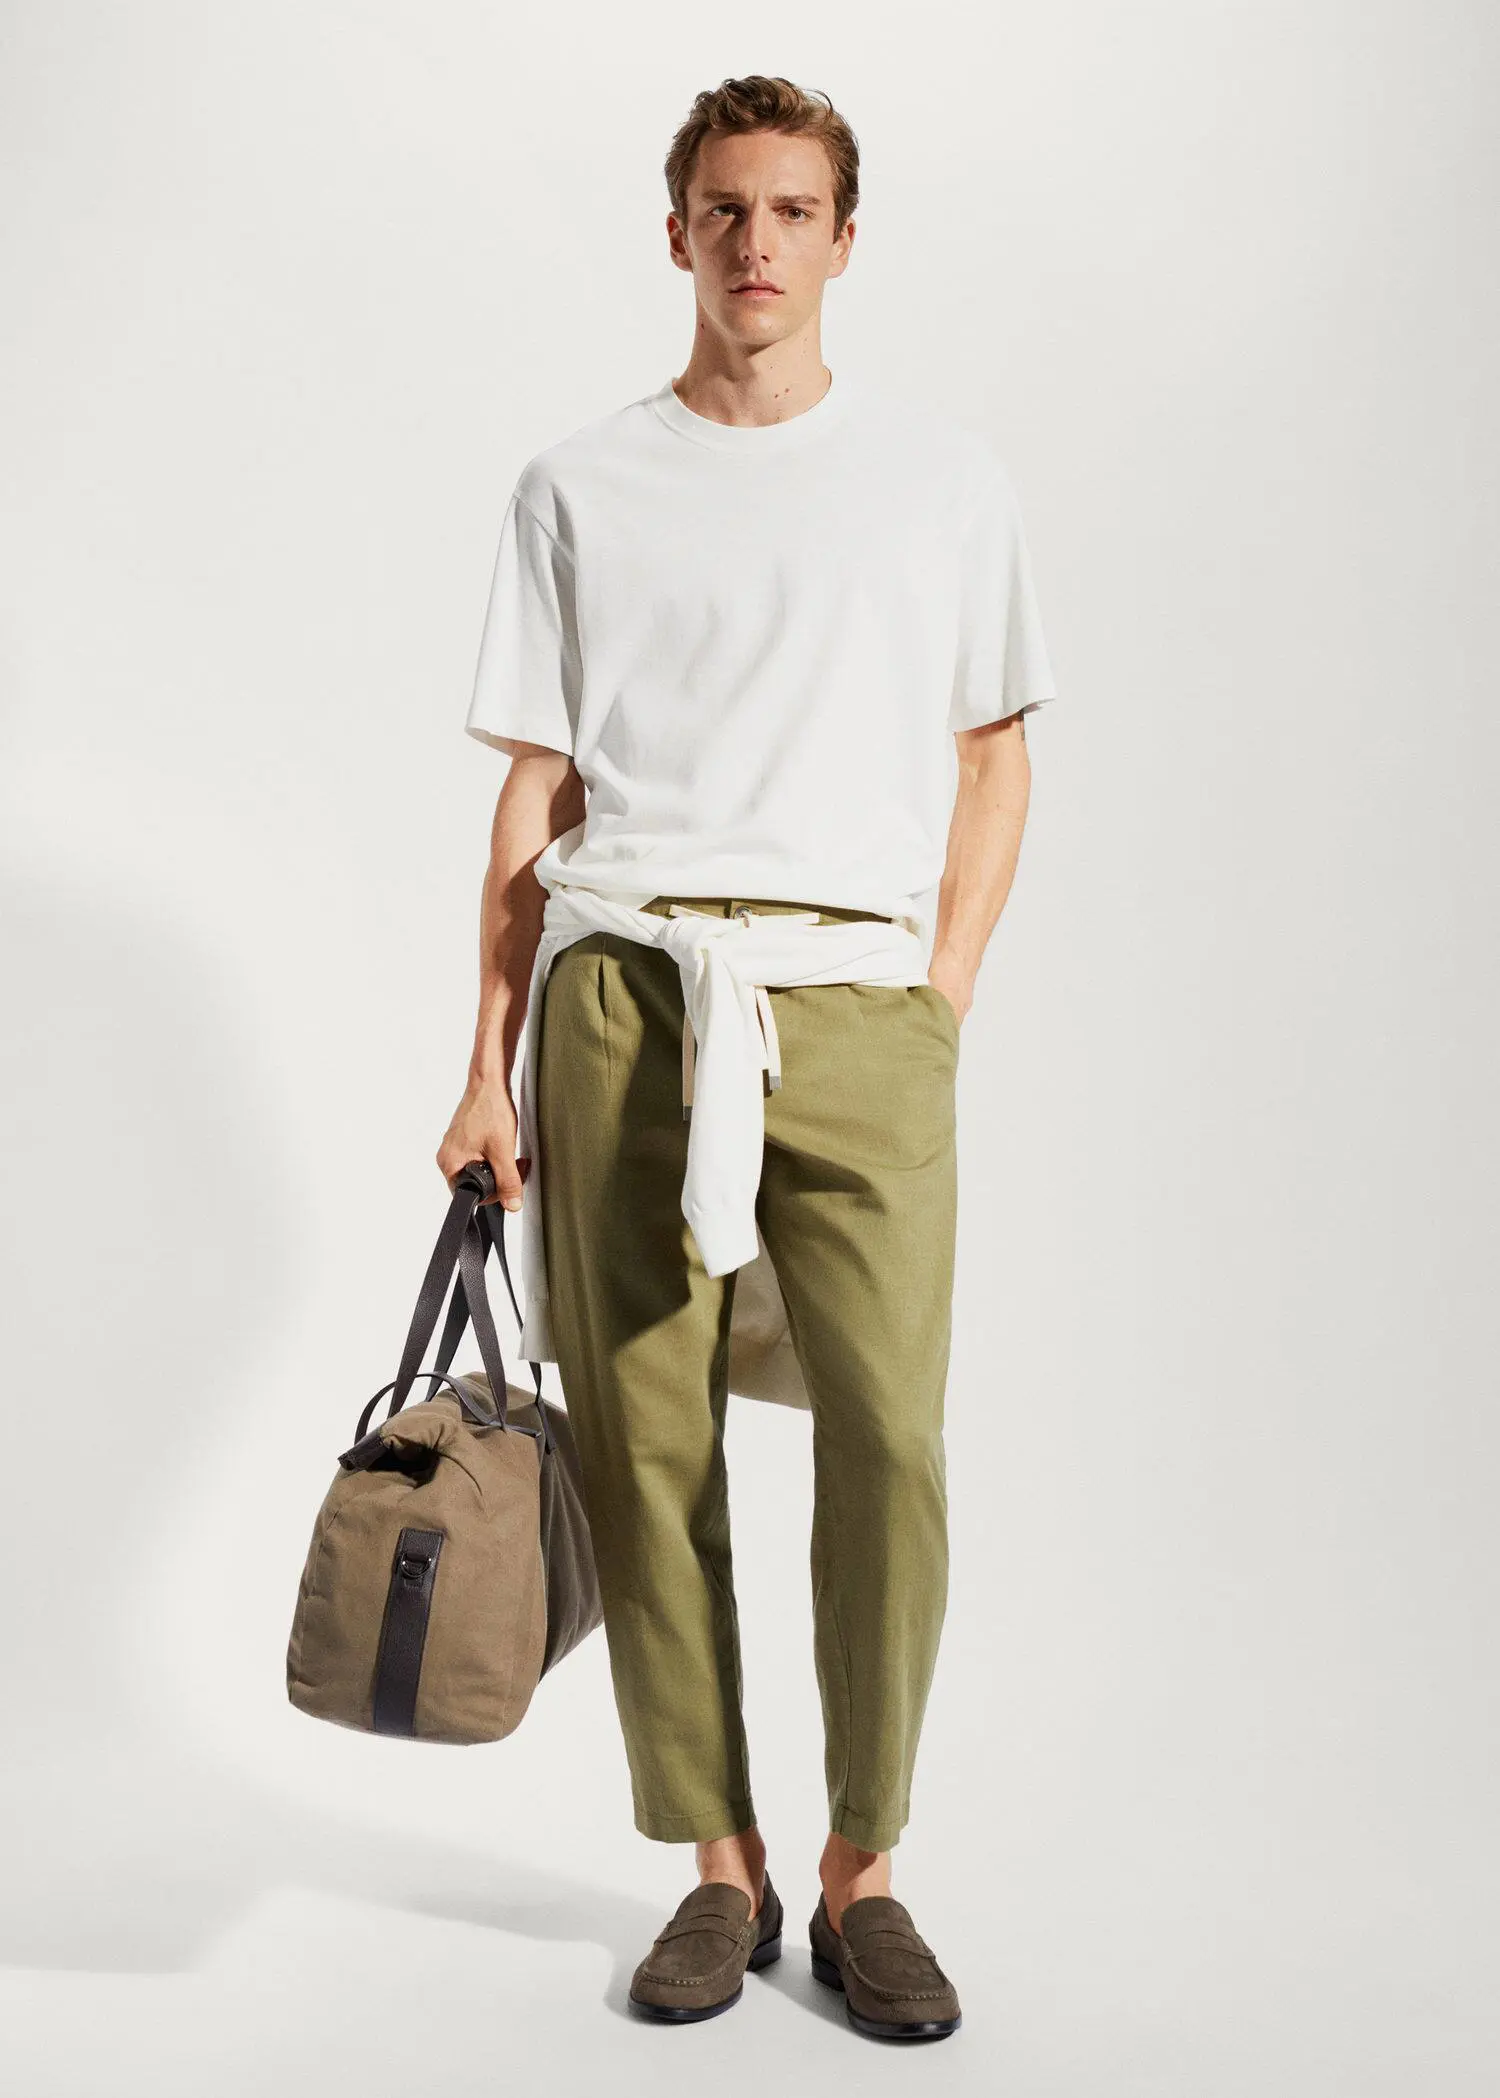 Mango Slim-fit pants with drawstring . a man holding a bag in front of a wall. 